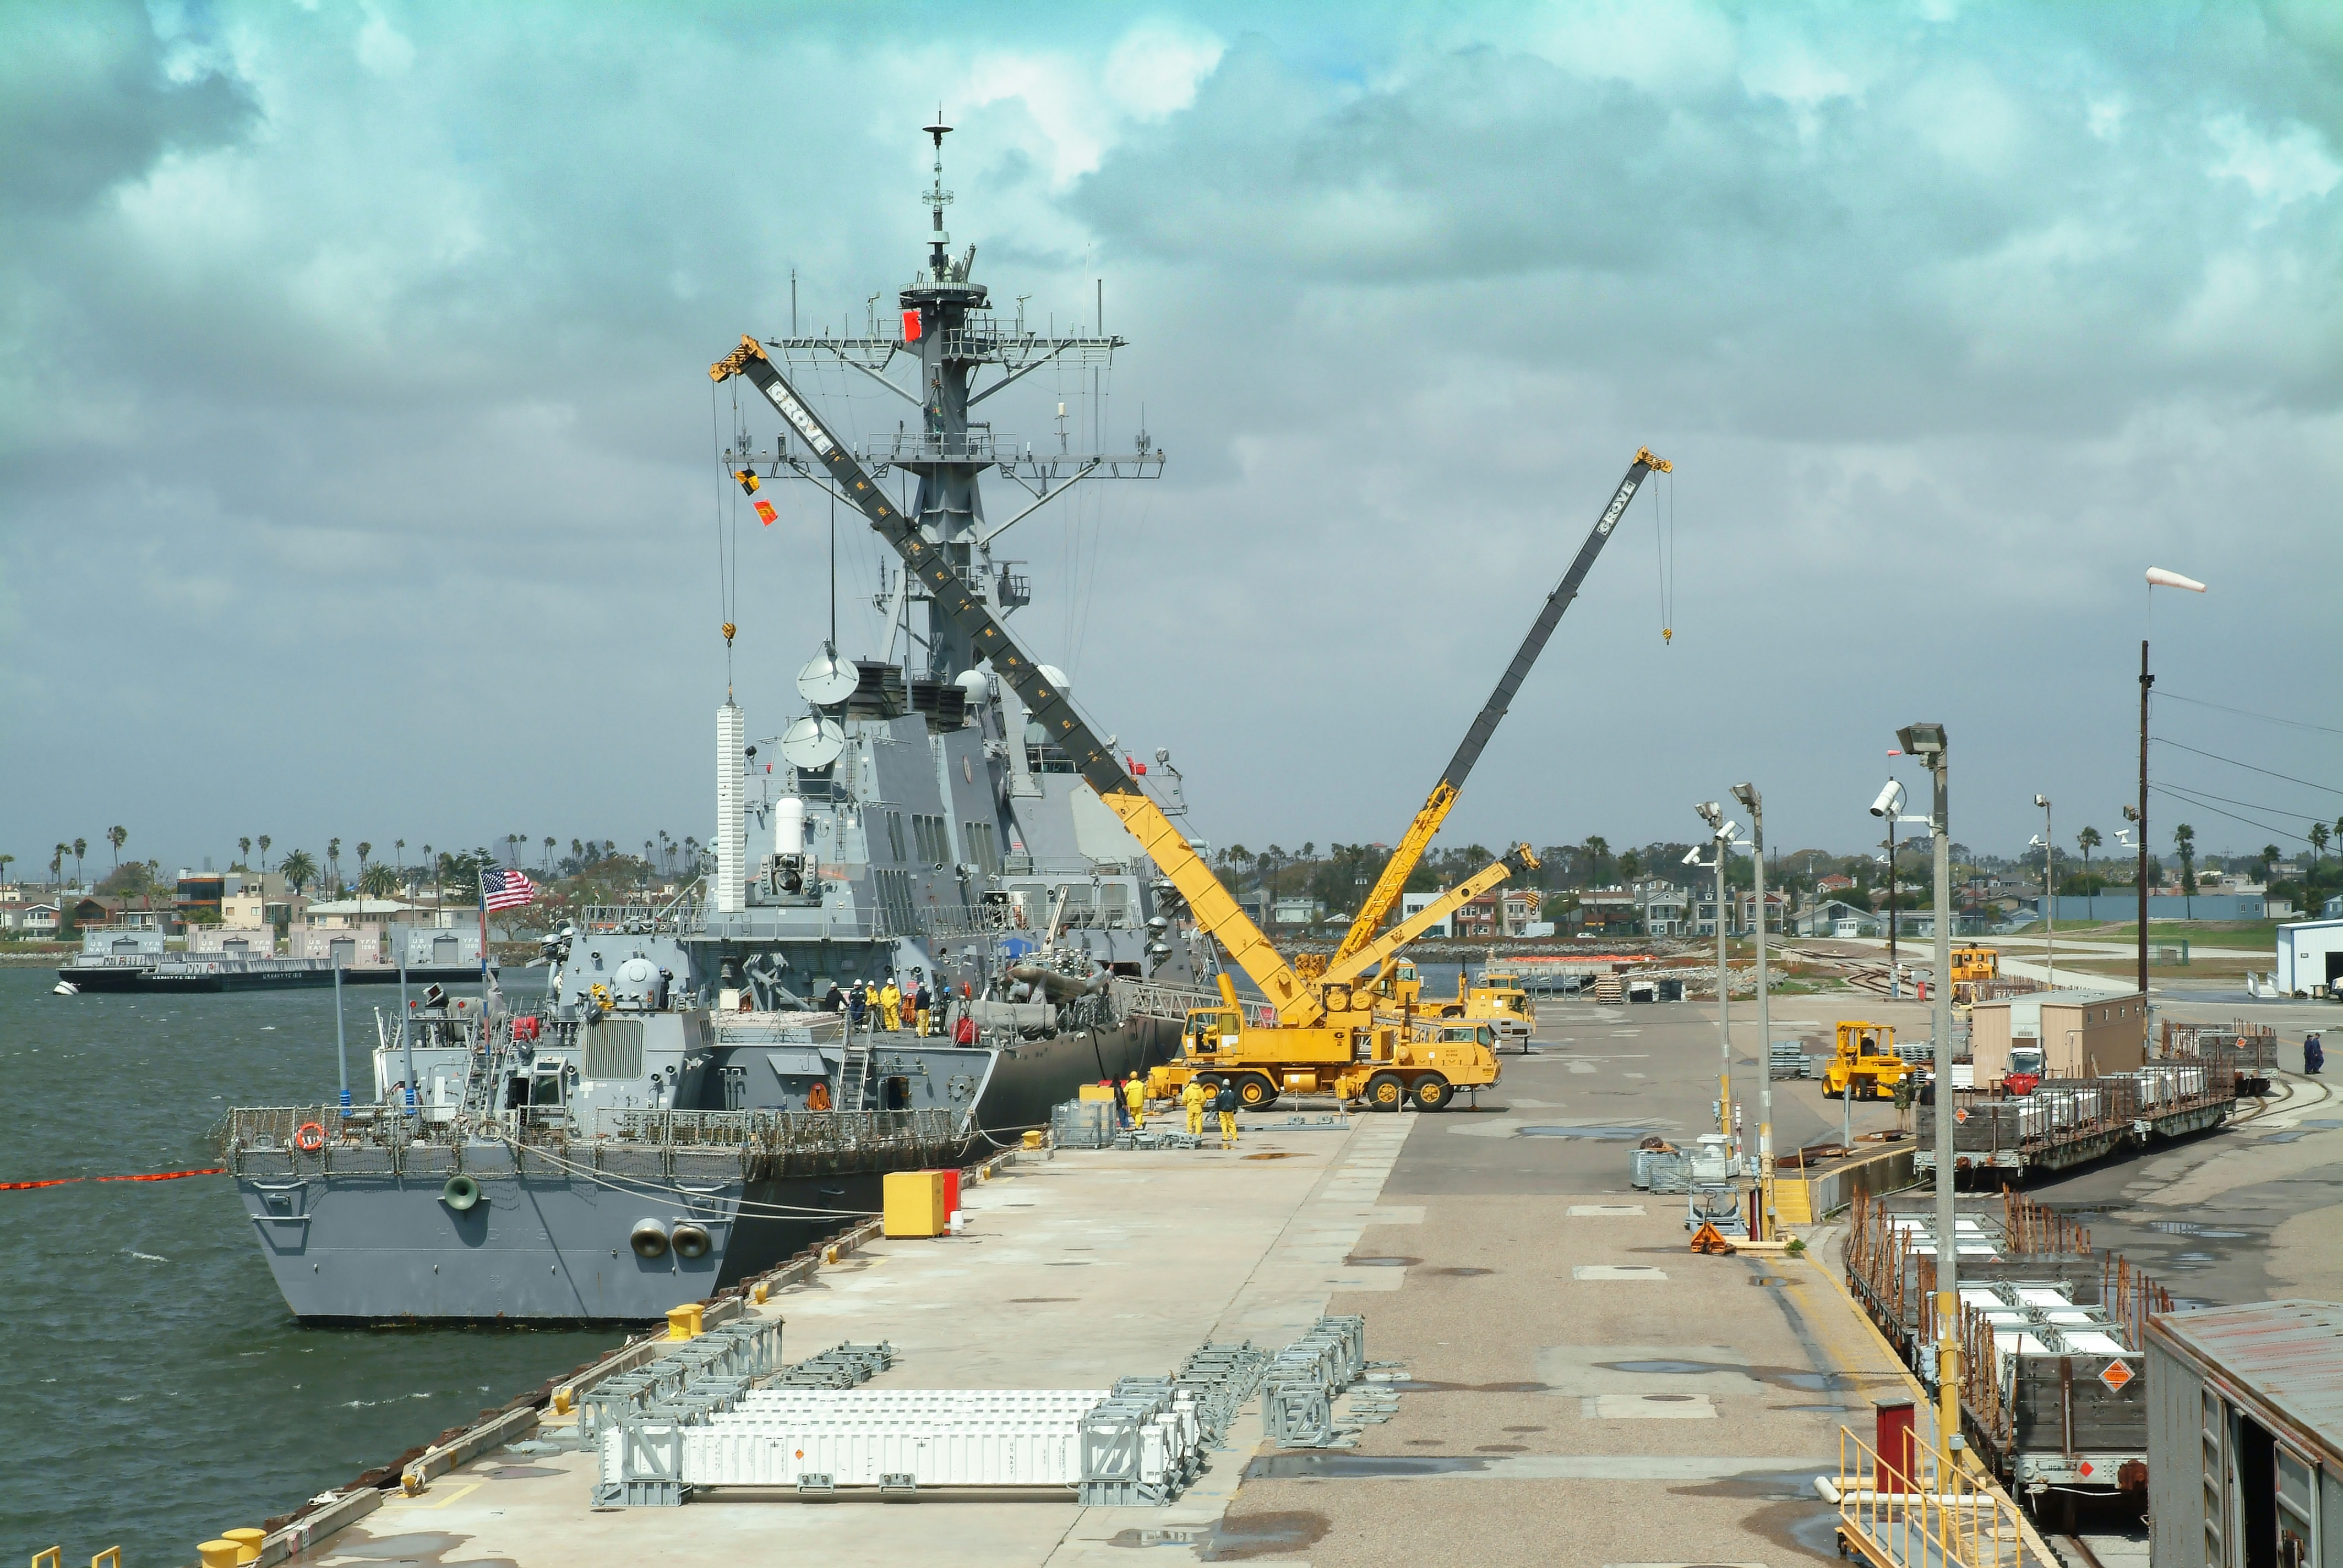 A guided missile destroyer is loaded with munitions a the Seal Beach Naval Weapons Station